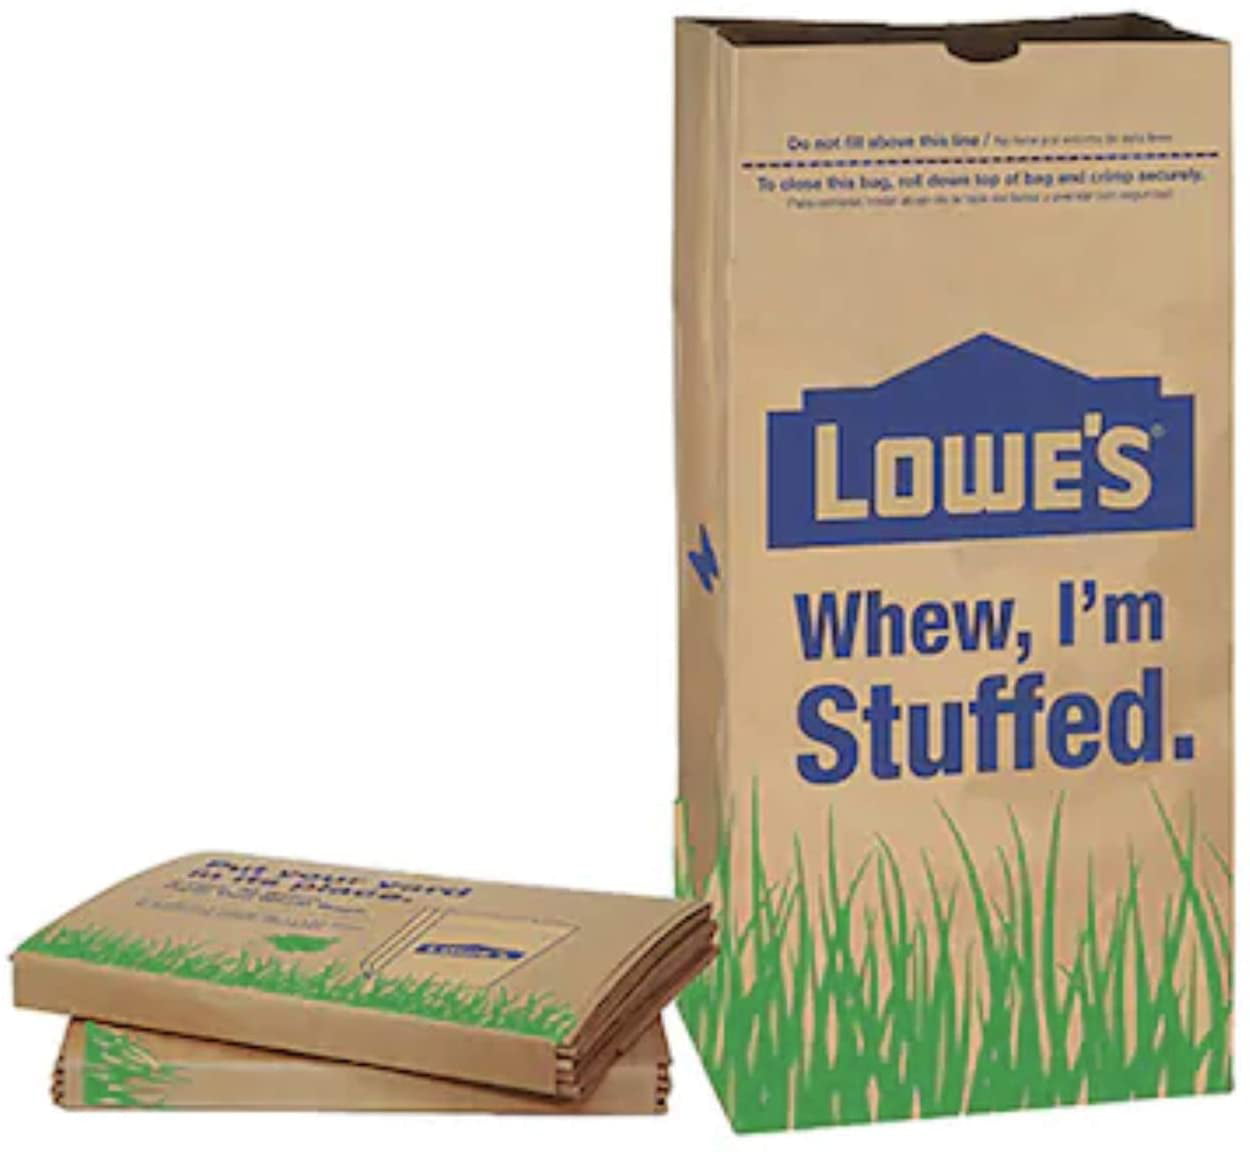 Large LOWESLL 10 Count Lowes 30 Gallon Heavy Duty Brown Paper Lawn and Refuse Bags for Home and Garden limited edition. 